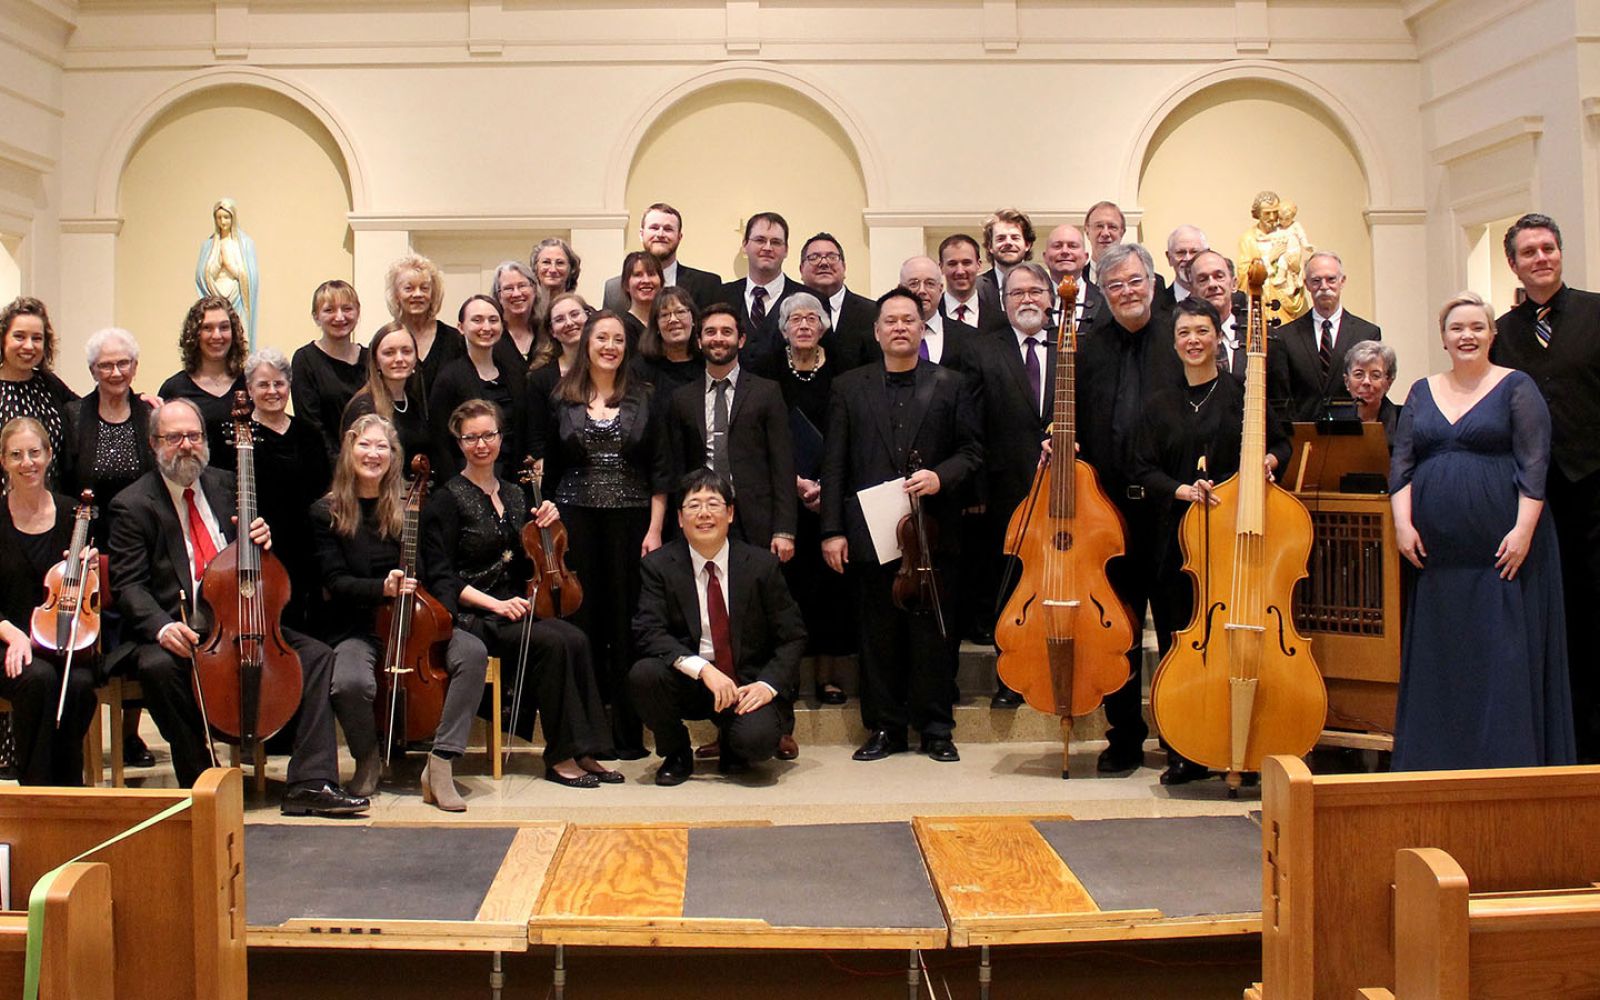 Bach Collegium Fort Wayne will celebrate the 300th anniversary of St. John Passion on Sunday, March 3.